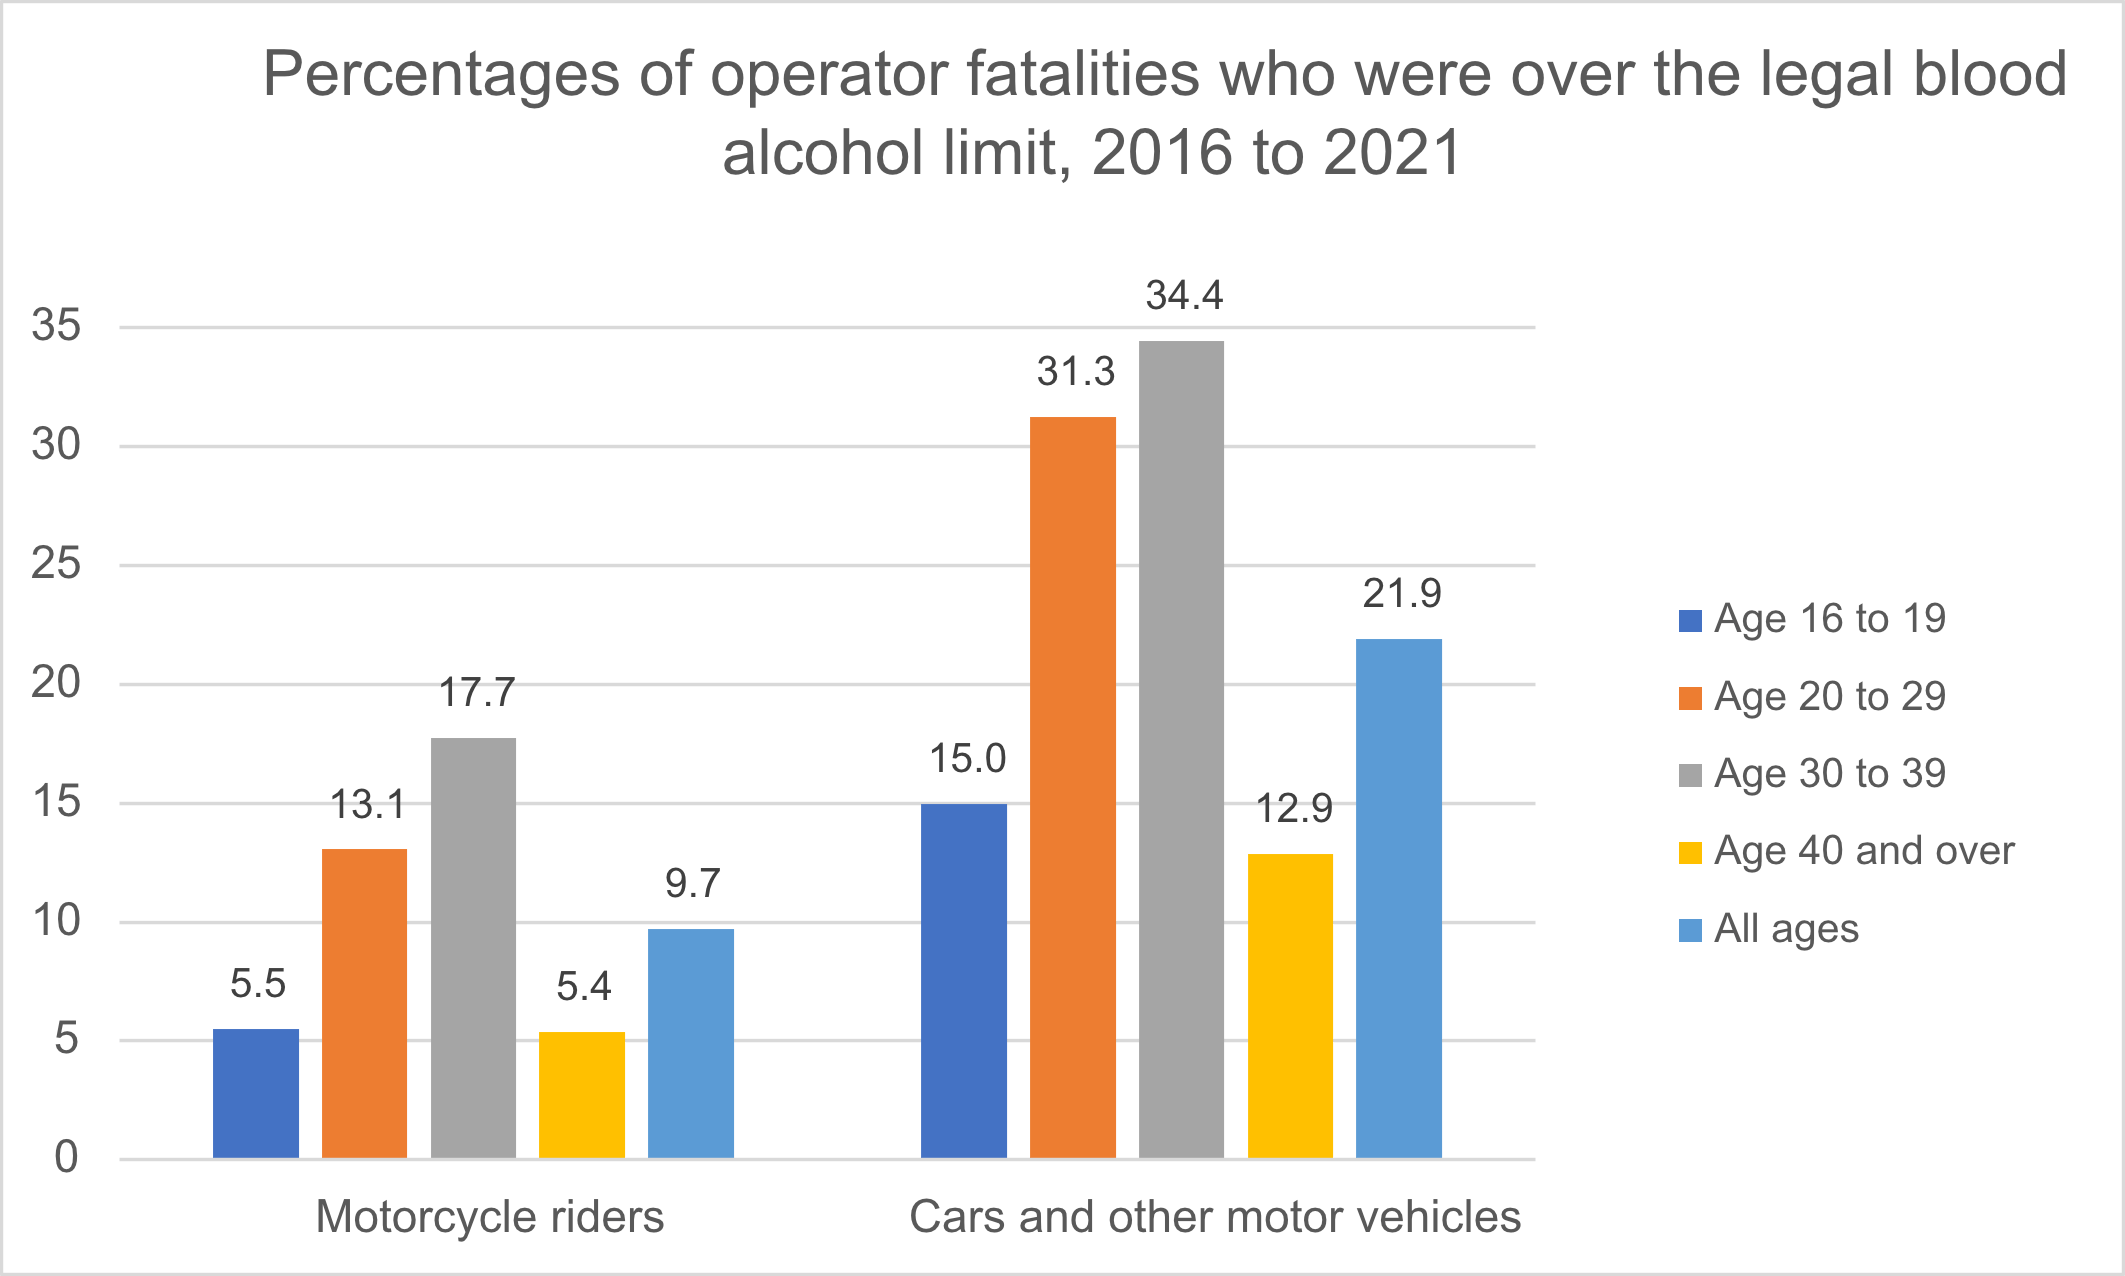 Operator fatalities over alcohol limit